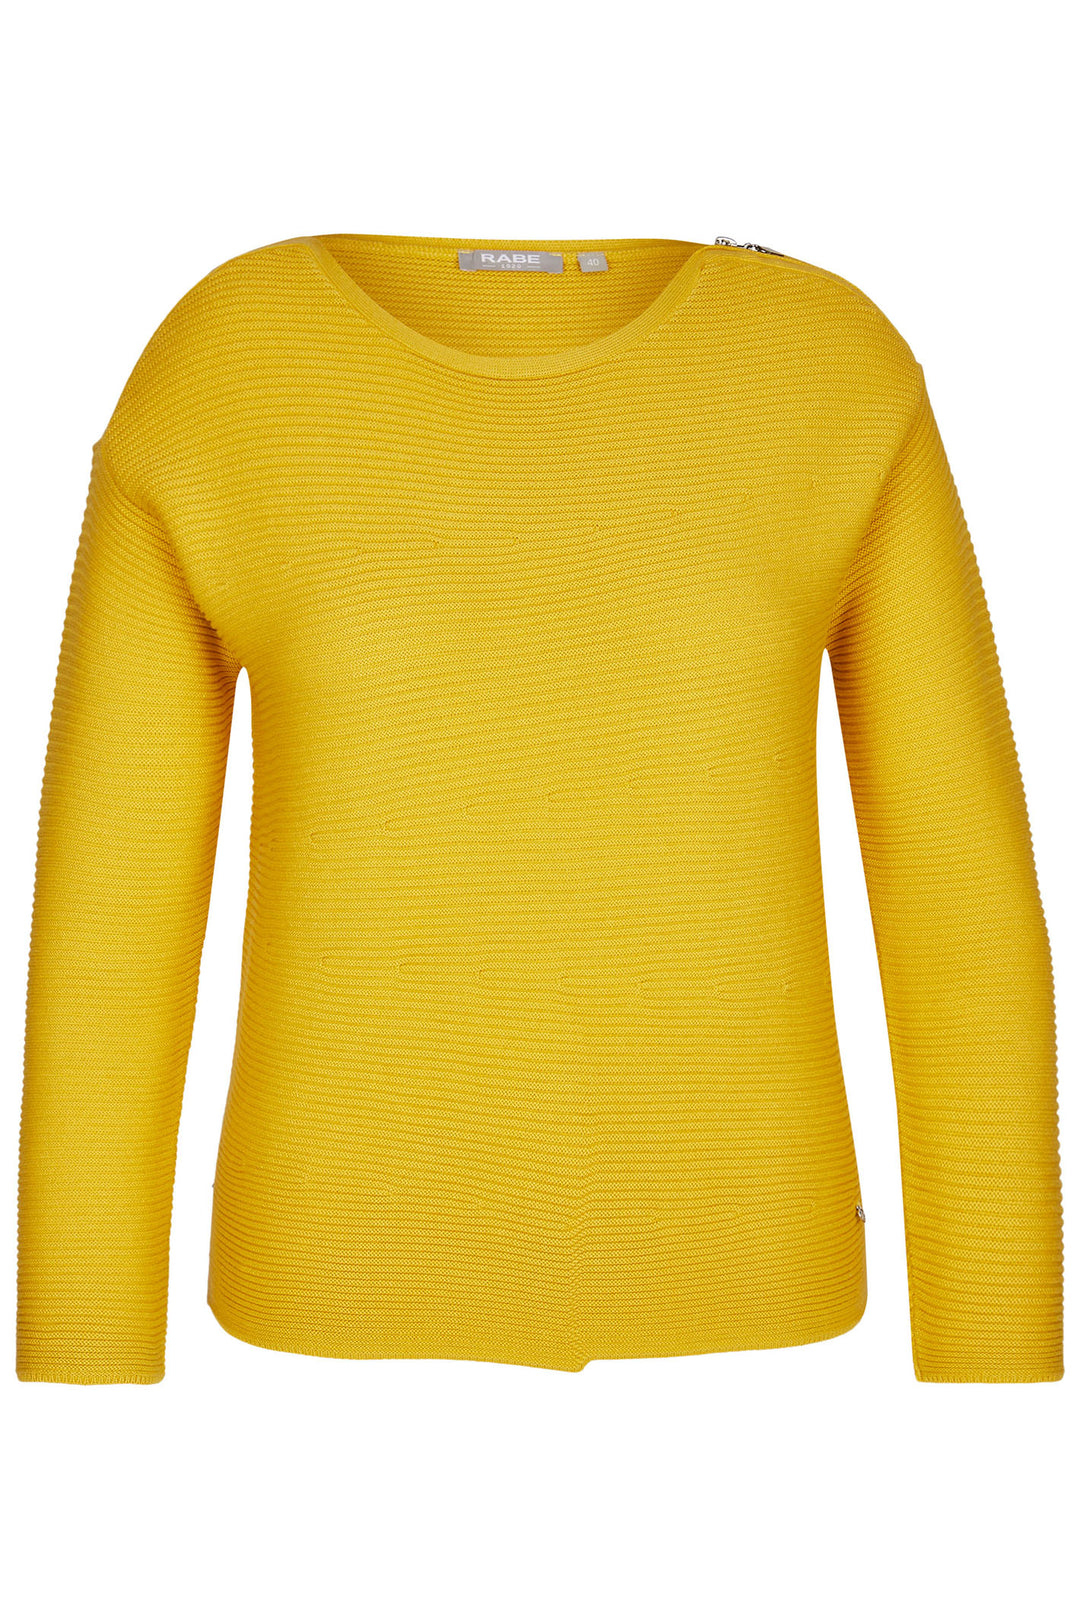 Rabe 45-321602 114 Yellow Ribbed Jumper - Shirley Allum Boutique